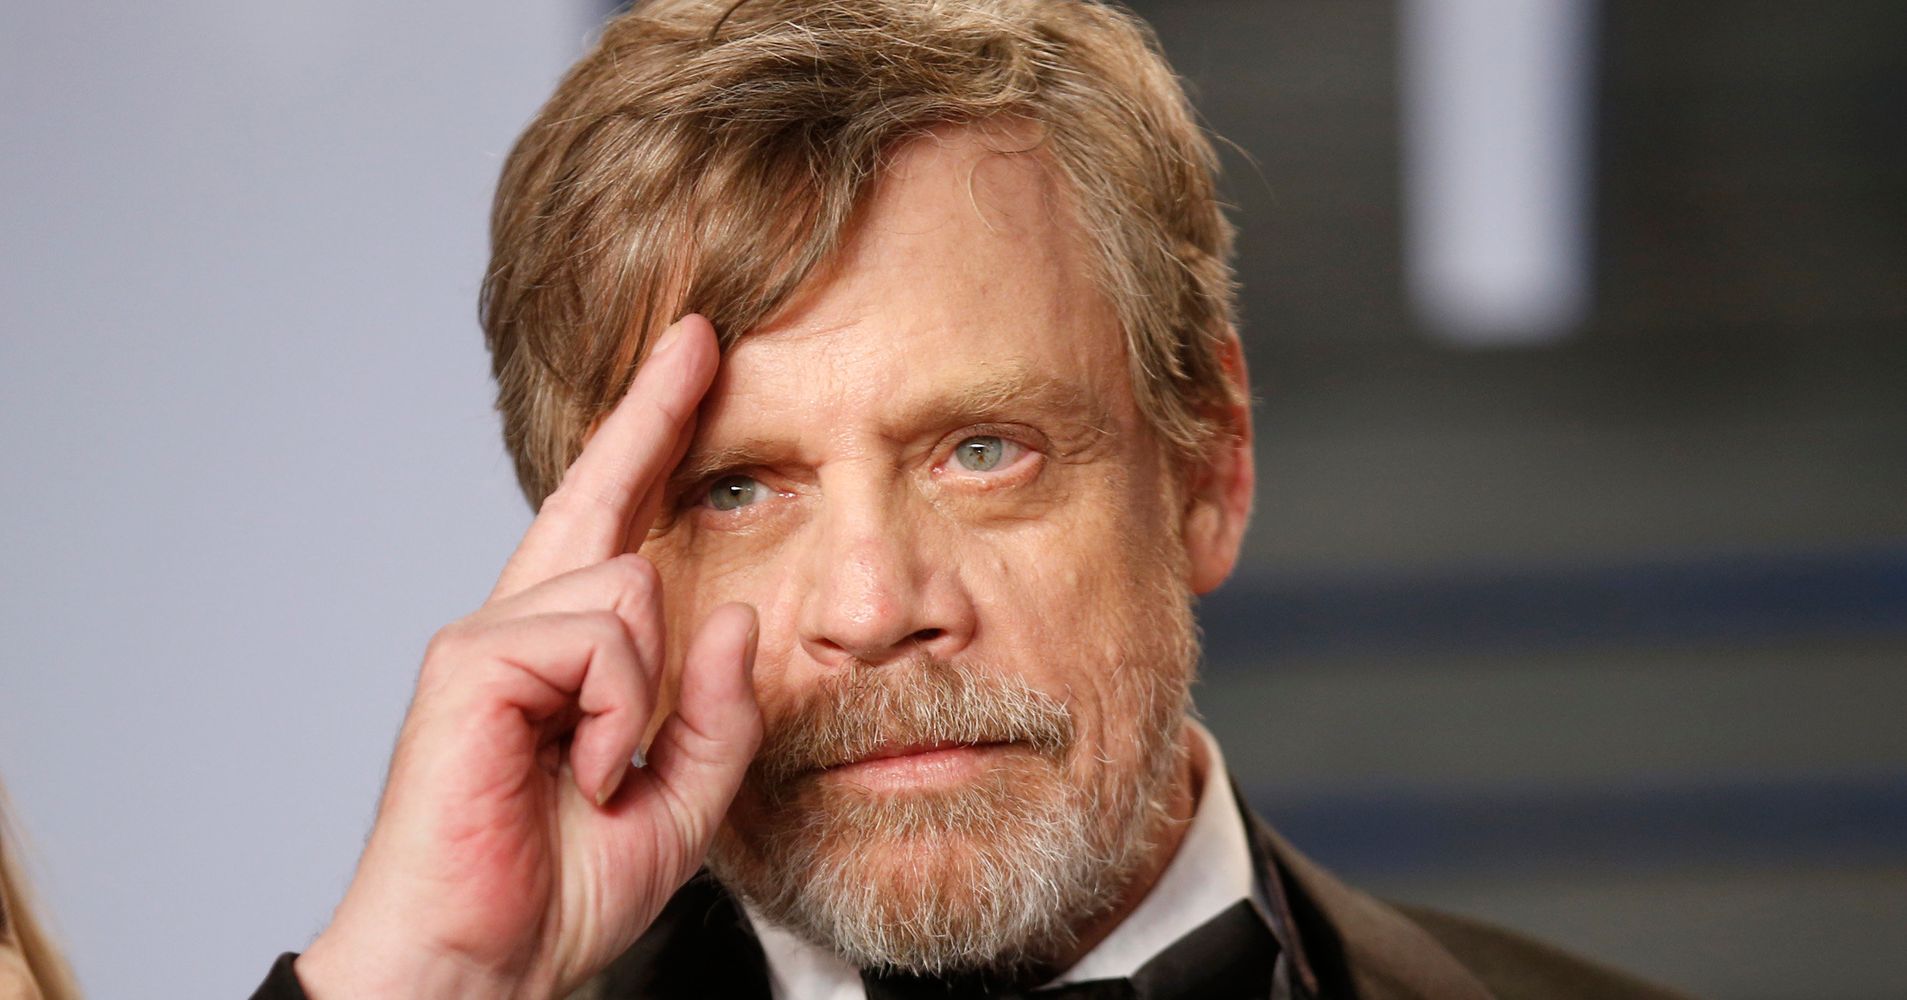 Mark Hamill Mocks Donald Trump's 'Space Force' With 'Star Wars' Burn | HuffPost